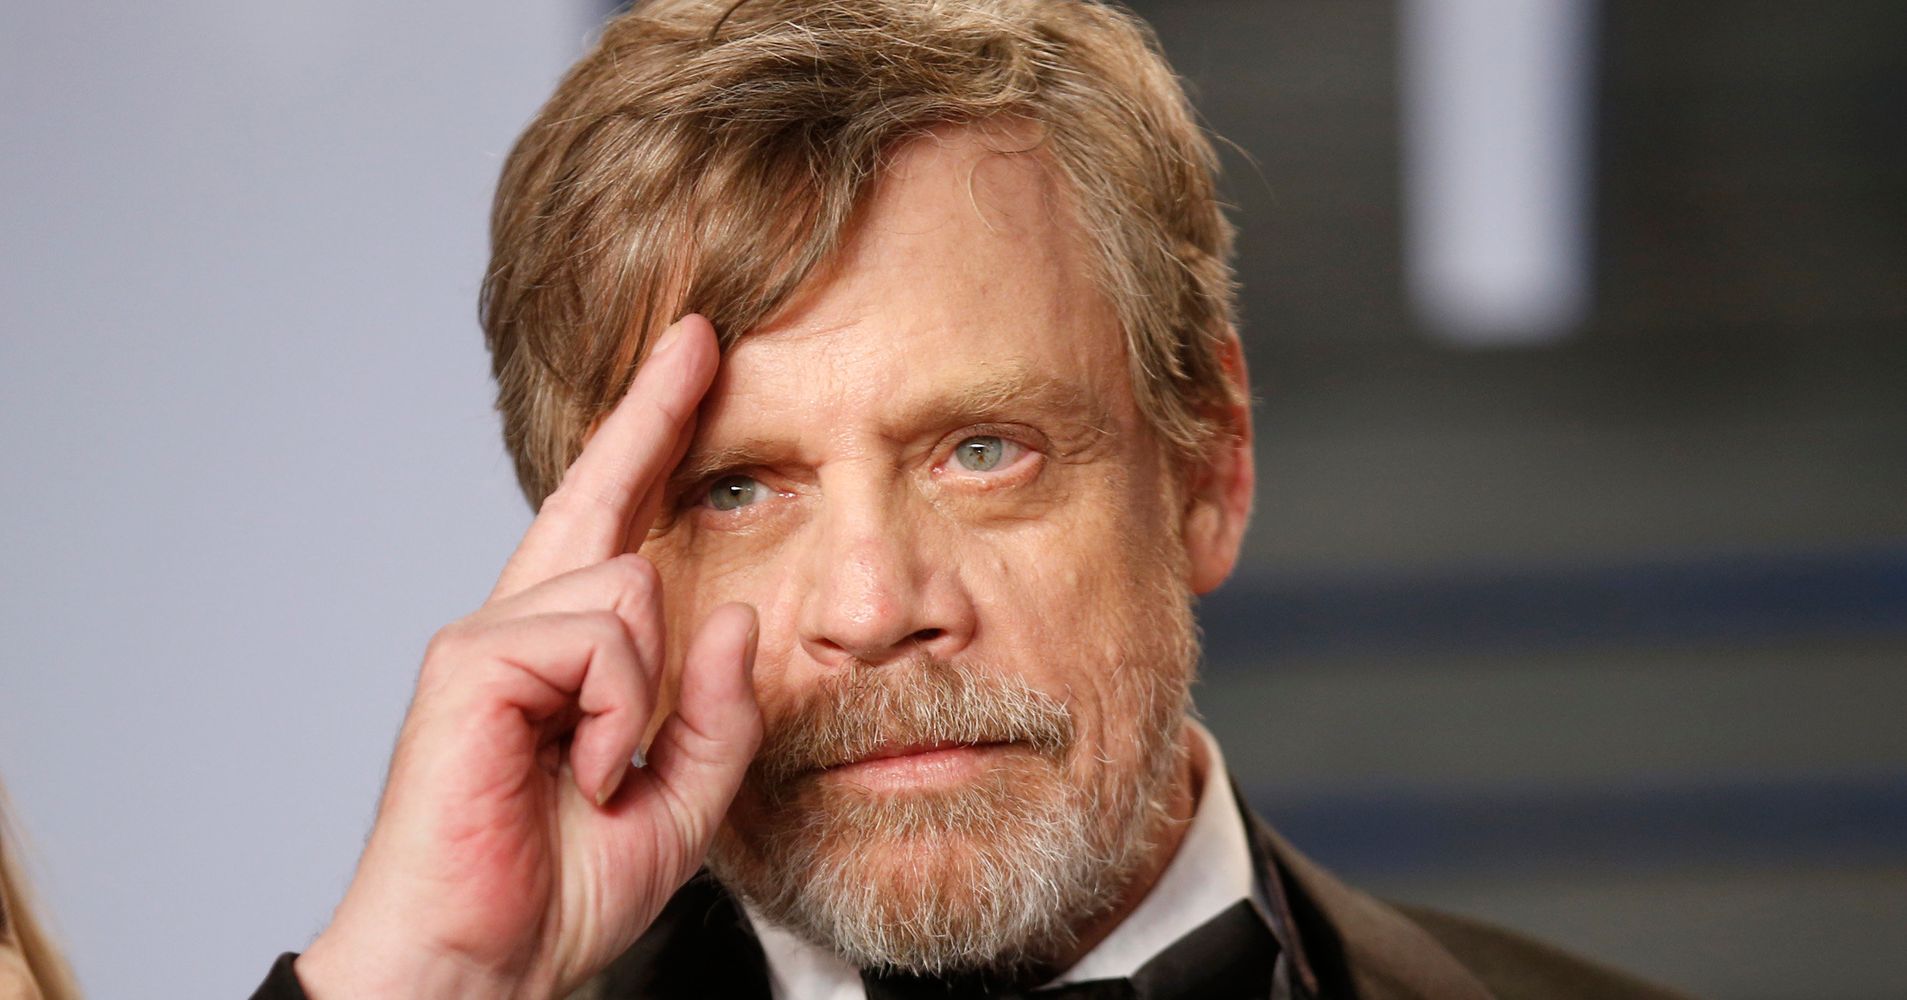 Mark Hamill Mocks Donald Trump's 'Space Force' With 'Star Wars' Burn | HuffPost